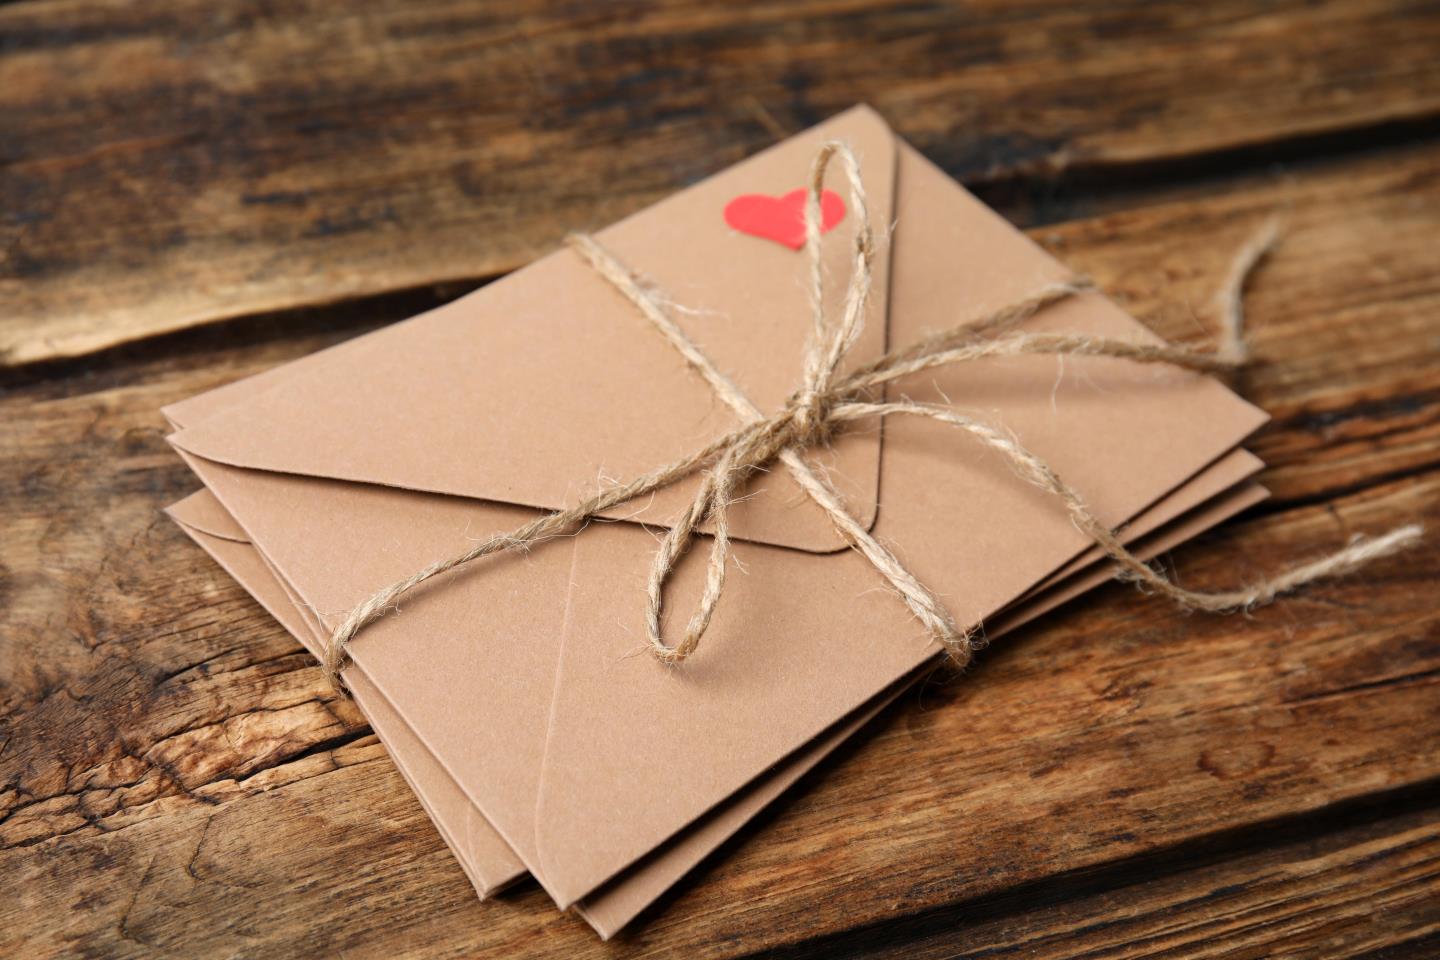 a love letter is just one of many Valentine's Day ideas for 2022